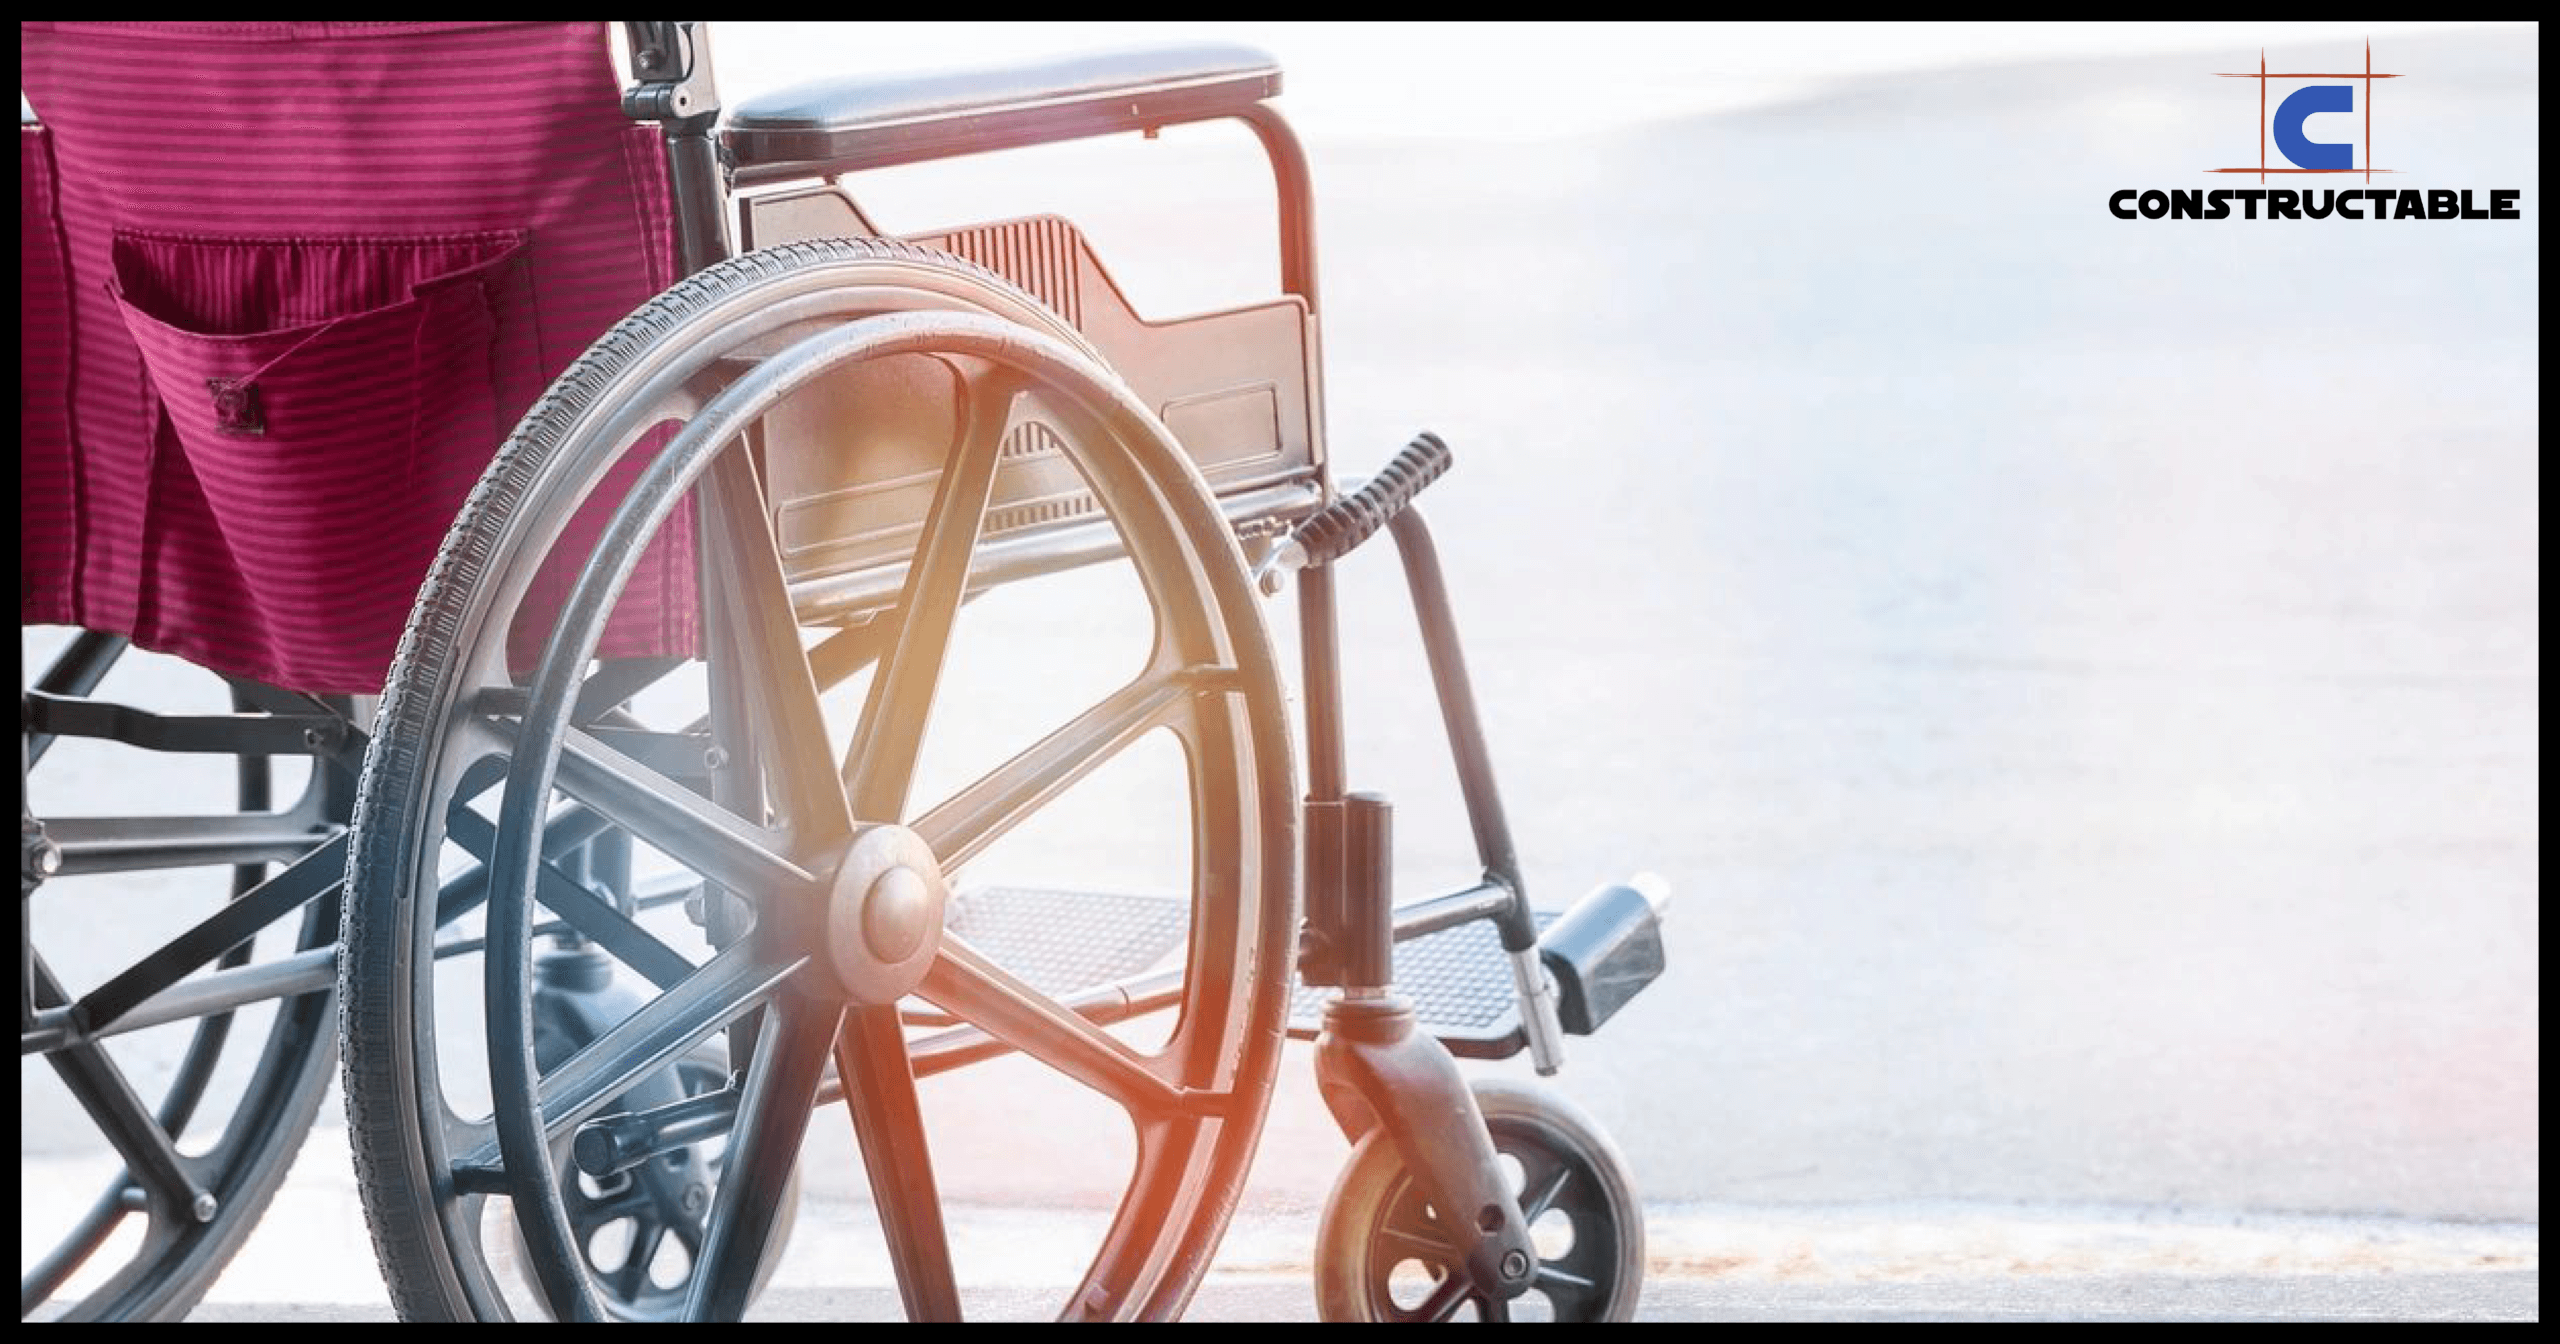 An empty wheelchair in sharp focus with sunlight casting a glow, featuring the construction costs logo on the top right.